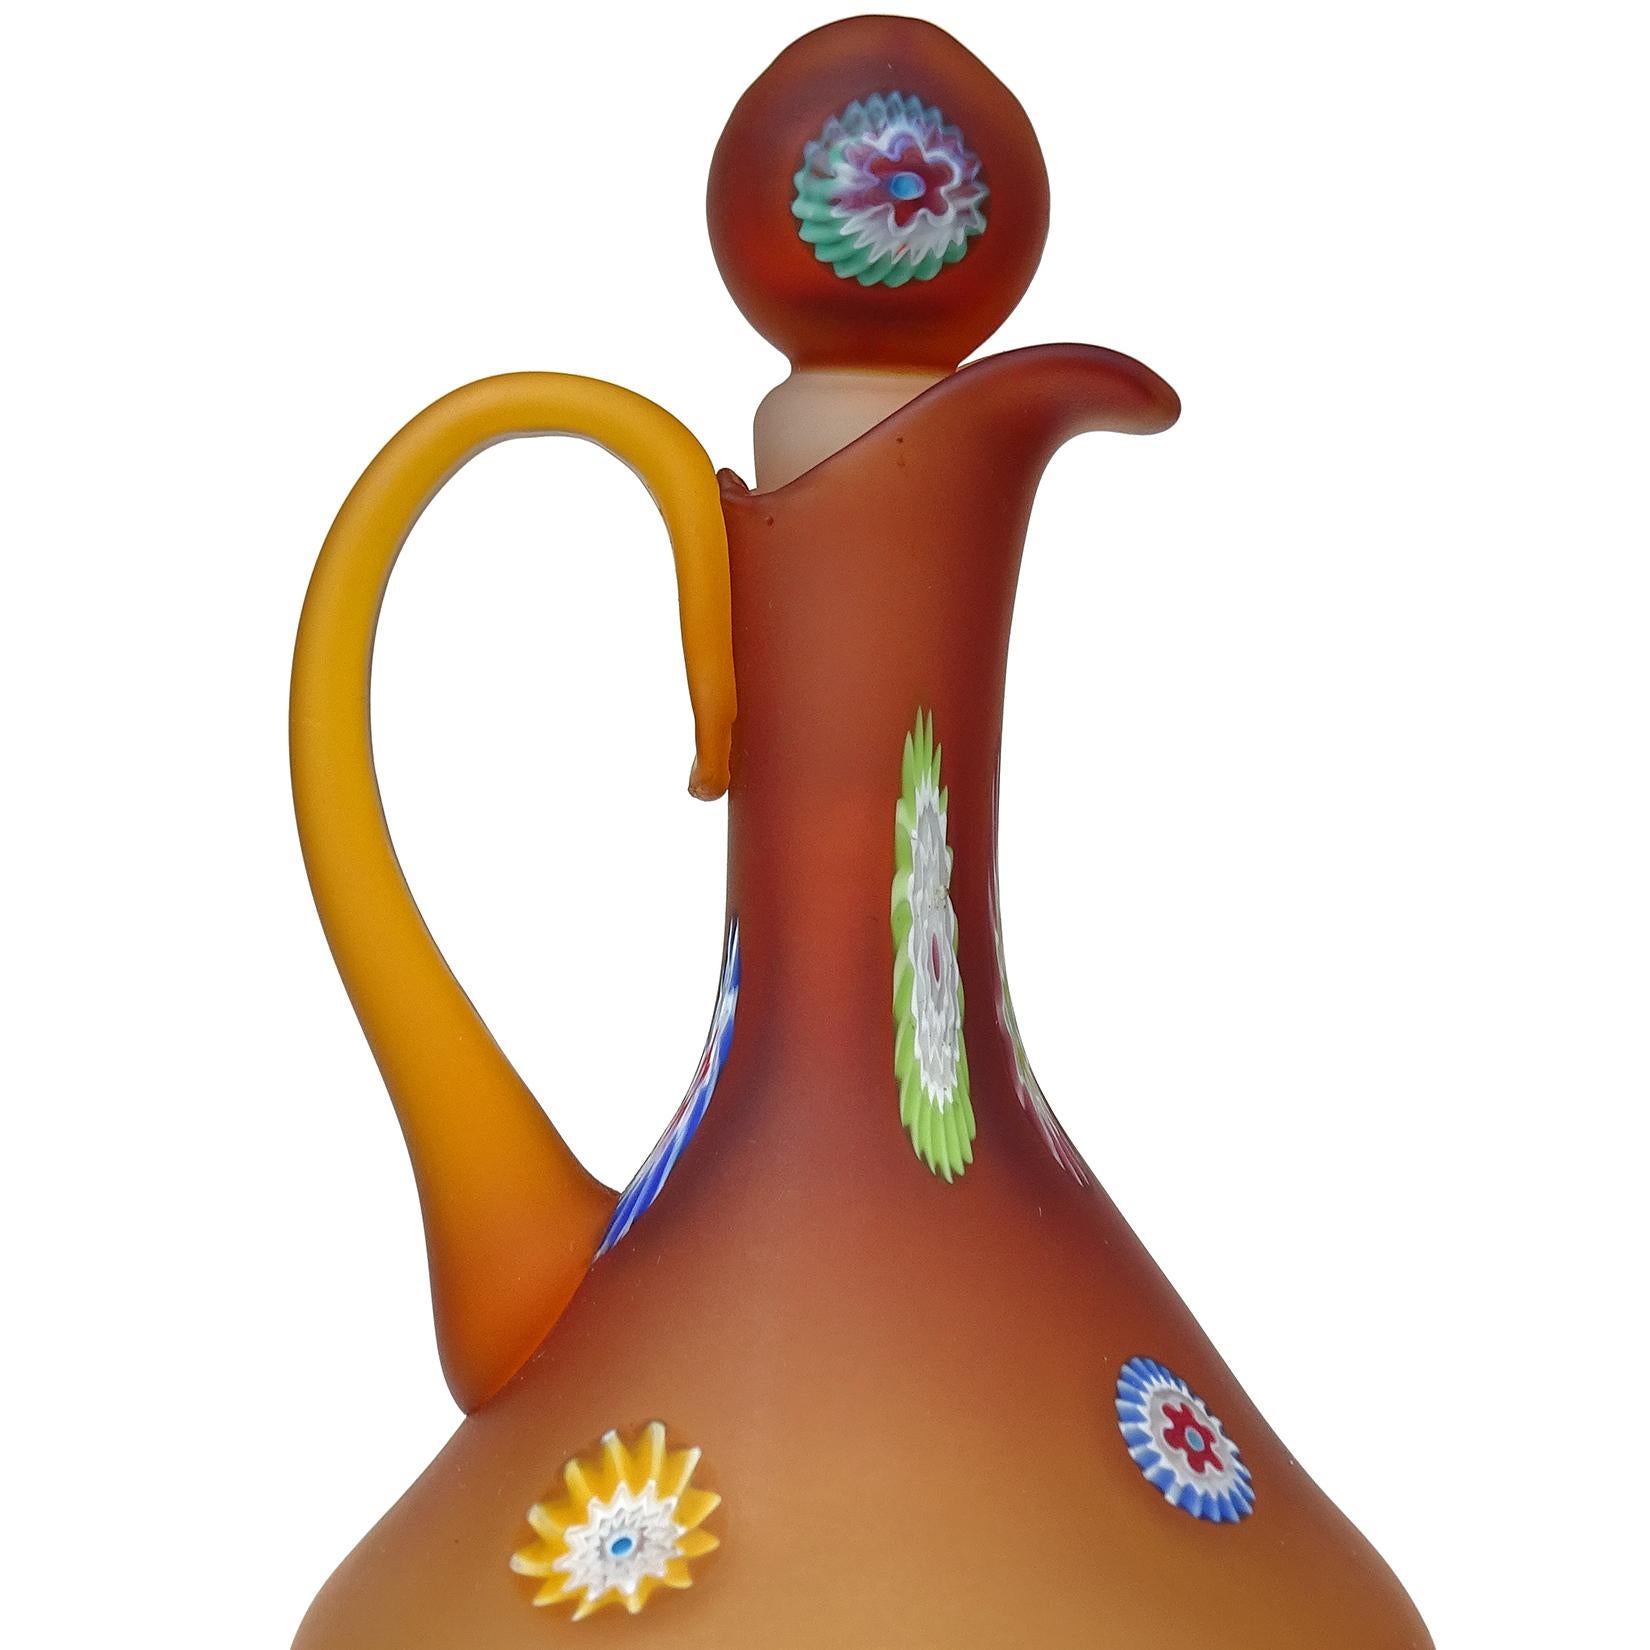 Beautiful vintage Murano hand blown amber satin surface Italian art glass ewer cruet, with applied millefiori flowers decoration. Documented to the Fratelli Toso company. It is soft to the touch. There are different flower canes throughout the